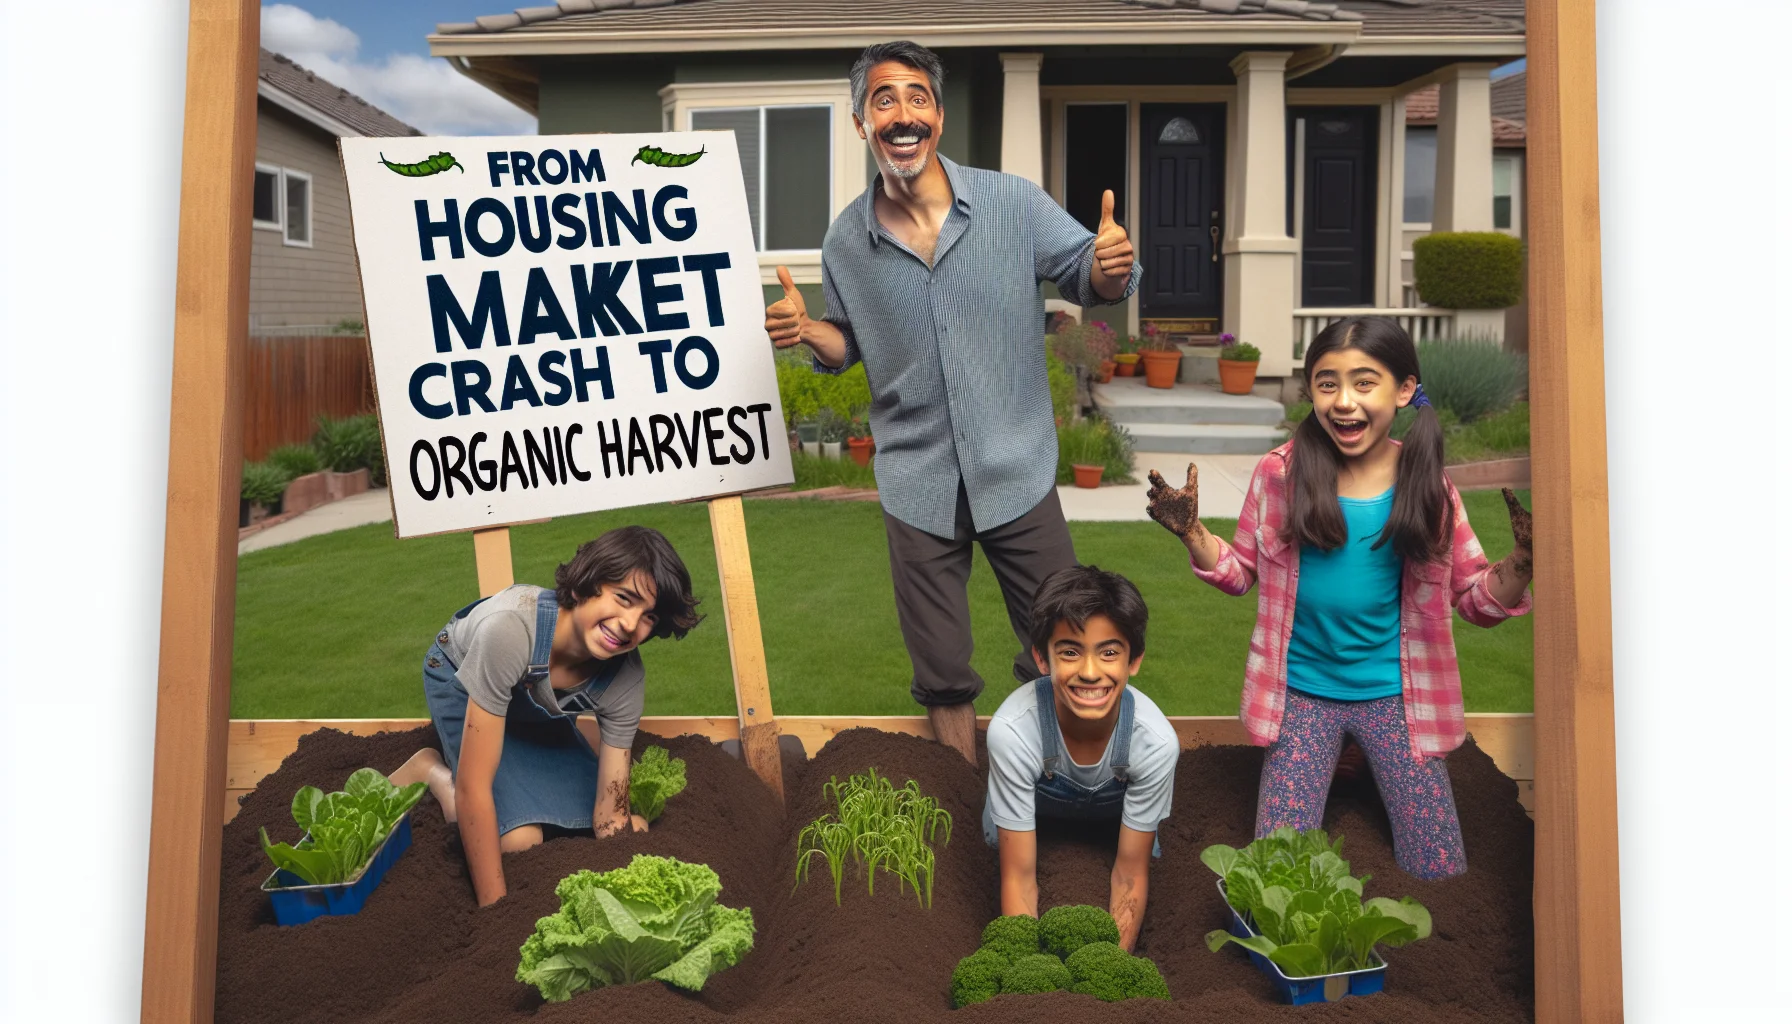 Create a humorous image that delves into the best possible outcome for homeowners in the event of a housing market crash. Show a Caucasian man and a Middle-Eastern woman, both homeowners, gleefully converting their suburban houses into thriving vegetable gardens. They're uprooting their manicured lawns to make way for rows of lush green crops. Their children, a Hispanic boy and a South Asian girl, are playfully helping them out, their faces smeared with dirt, but grinning with joy. A sign saying 'From Housing Market Crash to Organic Harvest' stands proudly in the foreground.